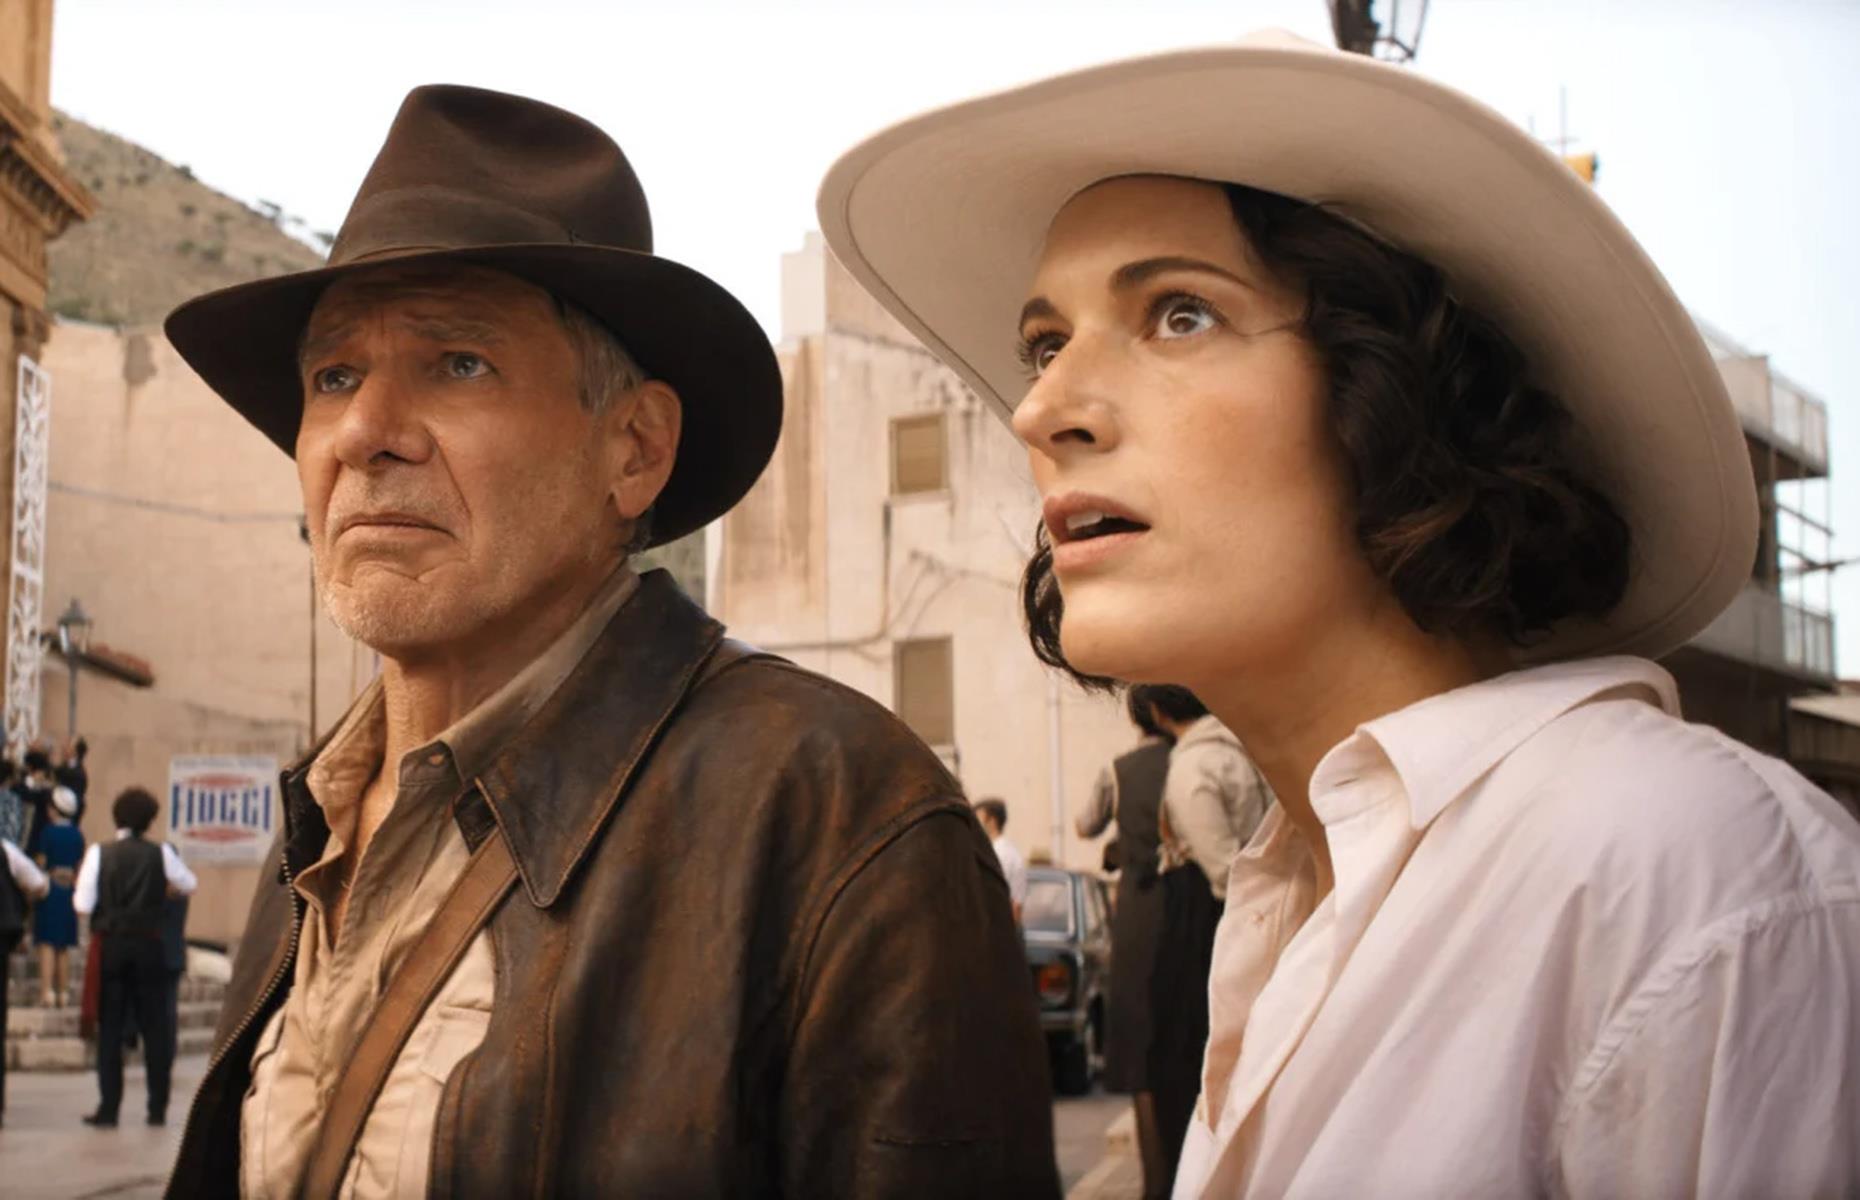 <p><em>Indiana Jones and the Dial of Destiny</em>, the hotly anticipated fifth entry in the<em> Indiana Jones</em> franchise, hit screens in June 2023.</p>  <p>Sources claim the movie had a production budget of around $300 million, making it one of the most expensive films ever made. And this eye-watering sum doesn't even account for marketing and distribution costs...</p>  <p>However, following a string of thoroughly average reviews, the summer blockbuster only managed to pull in $384 million globally. According to <em>Screen Rant,</em> the flop has cost Disney at least $100 million. </p>